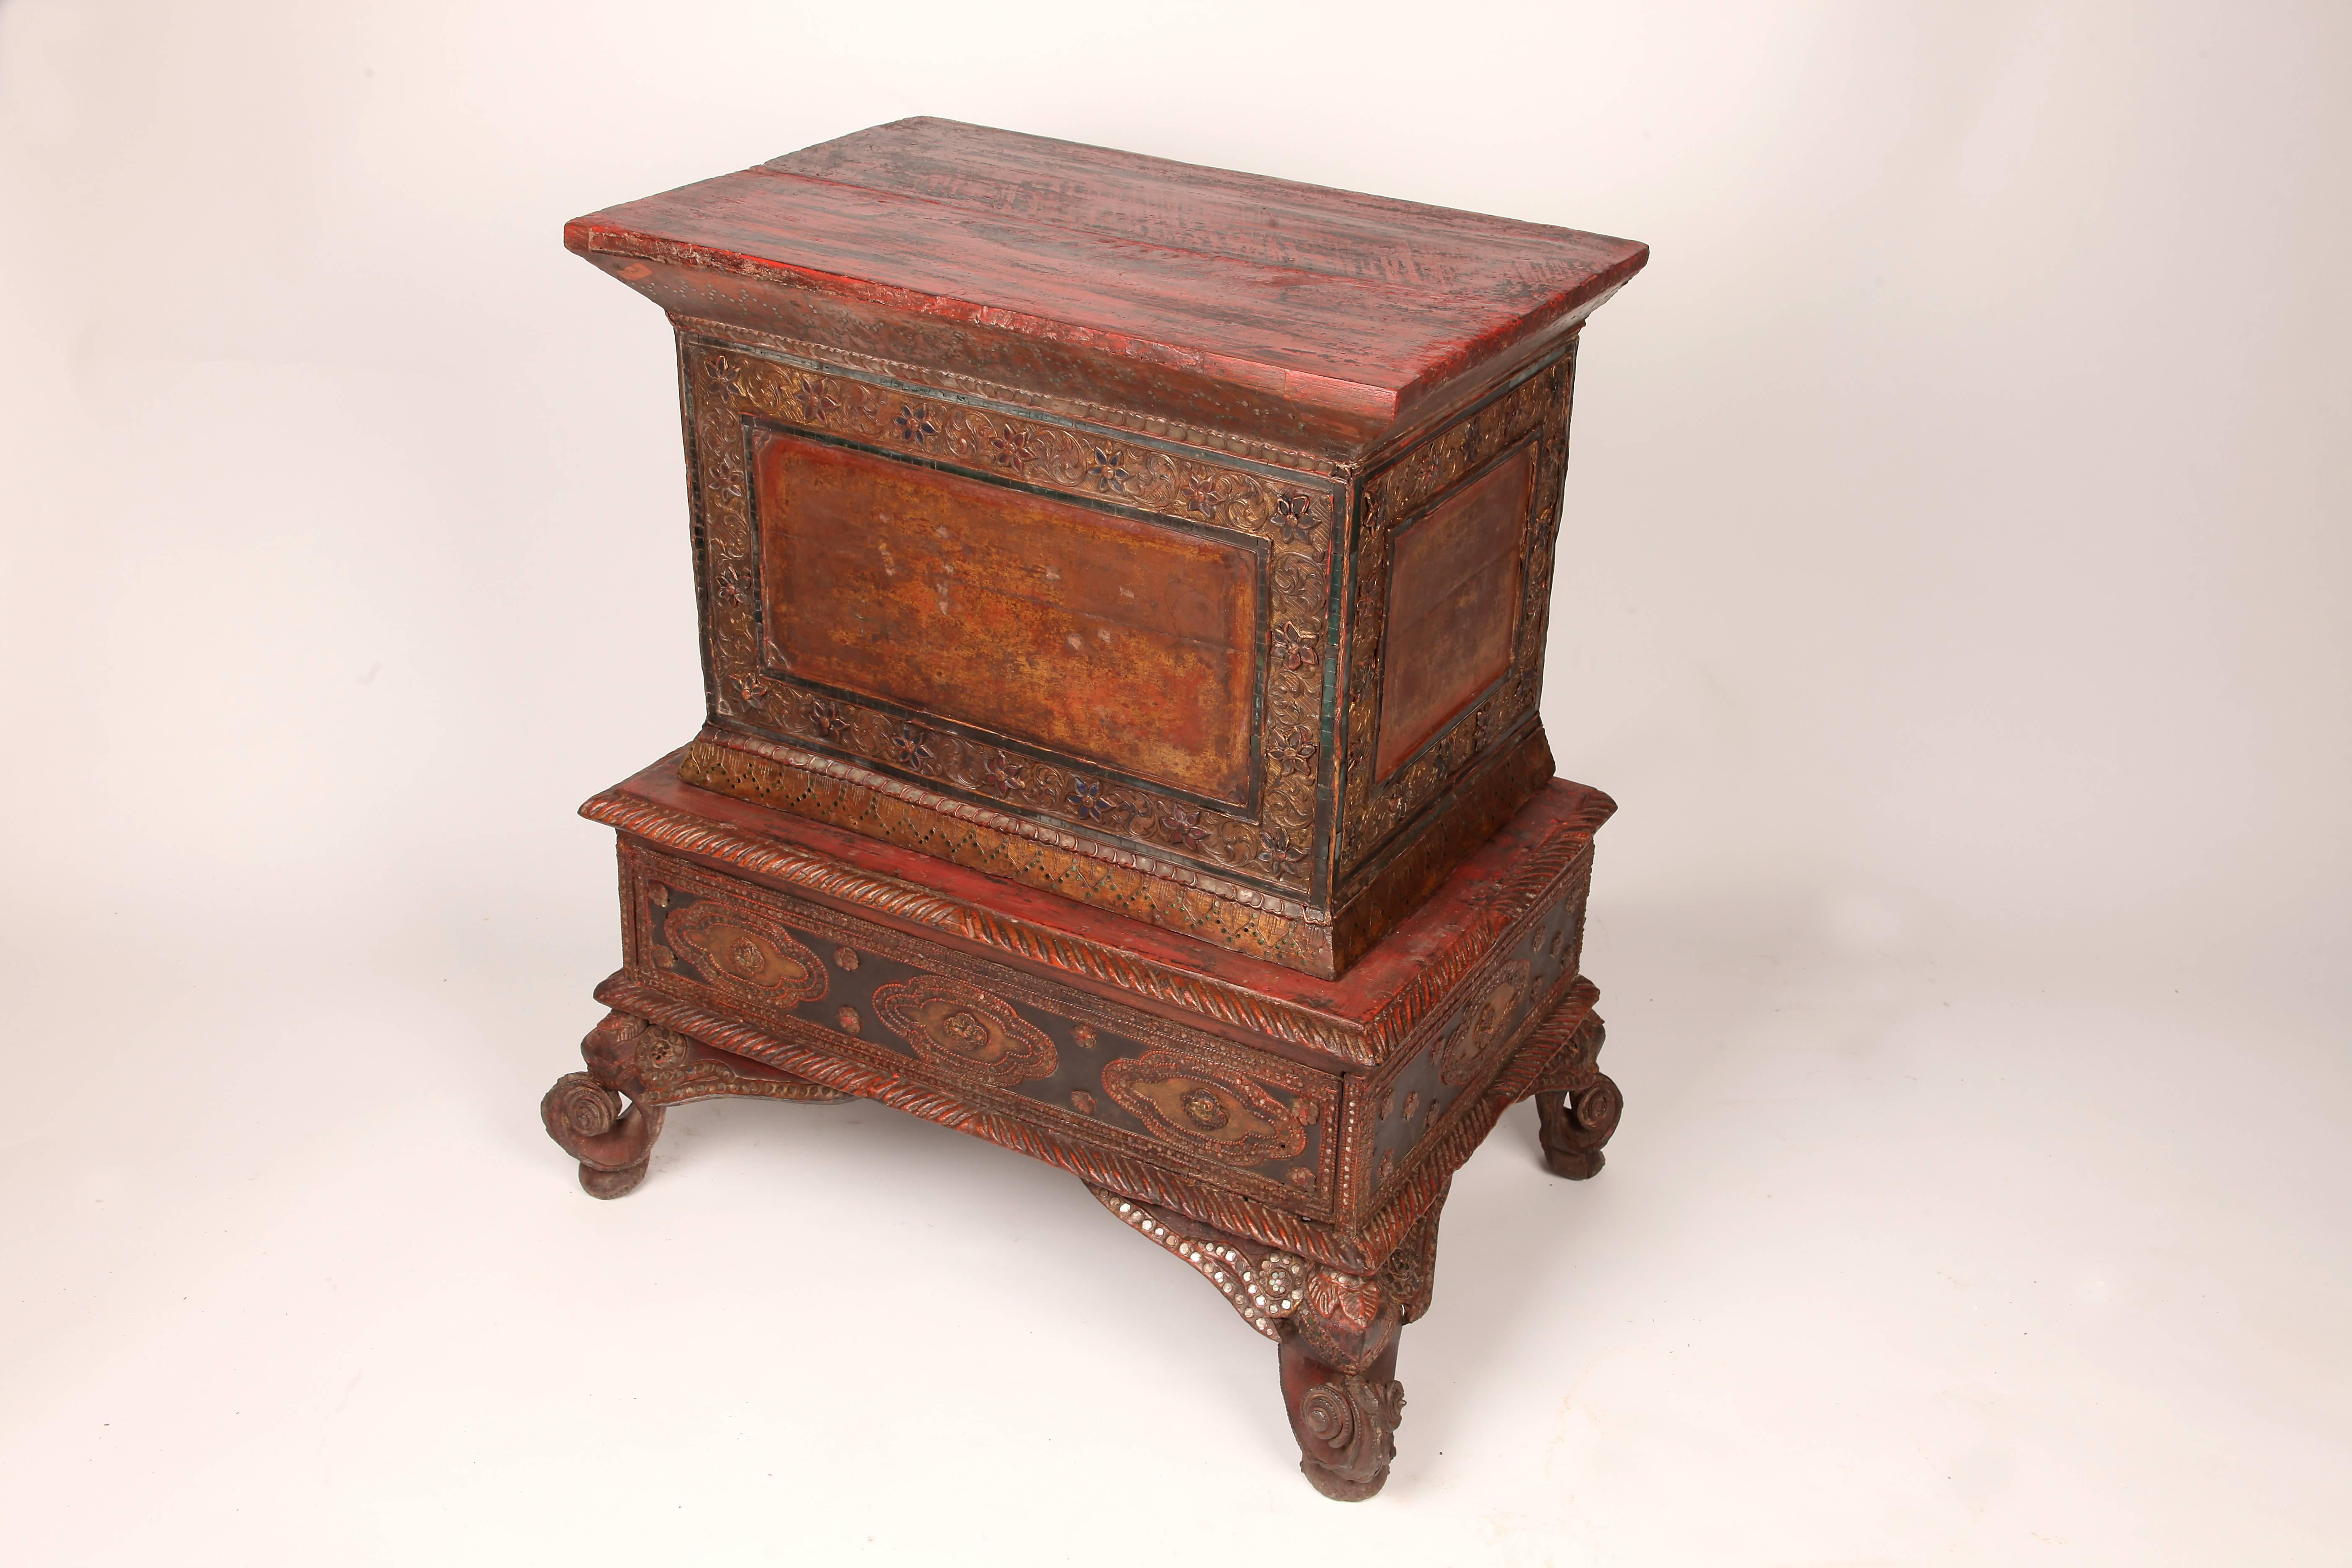 This manuscript trunk is from Thailand and is made from teakwood, circa 1880.